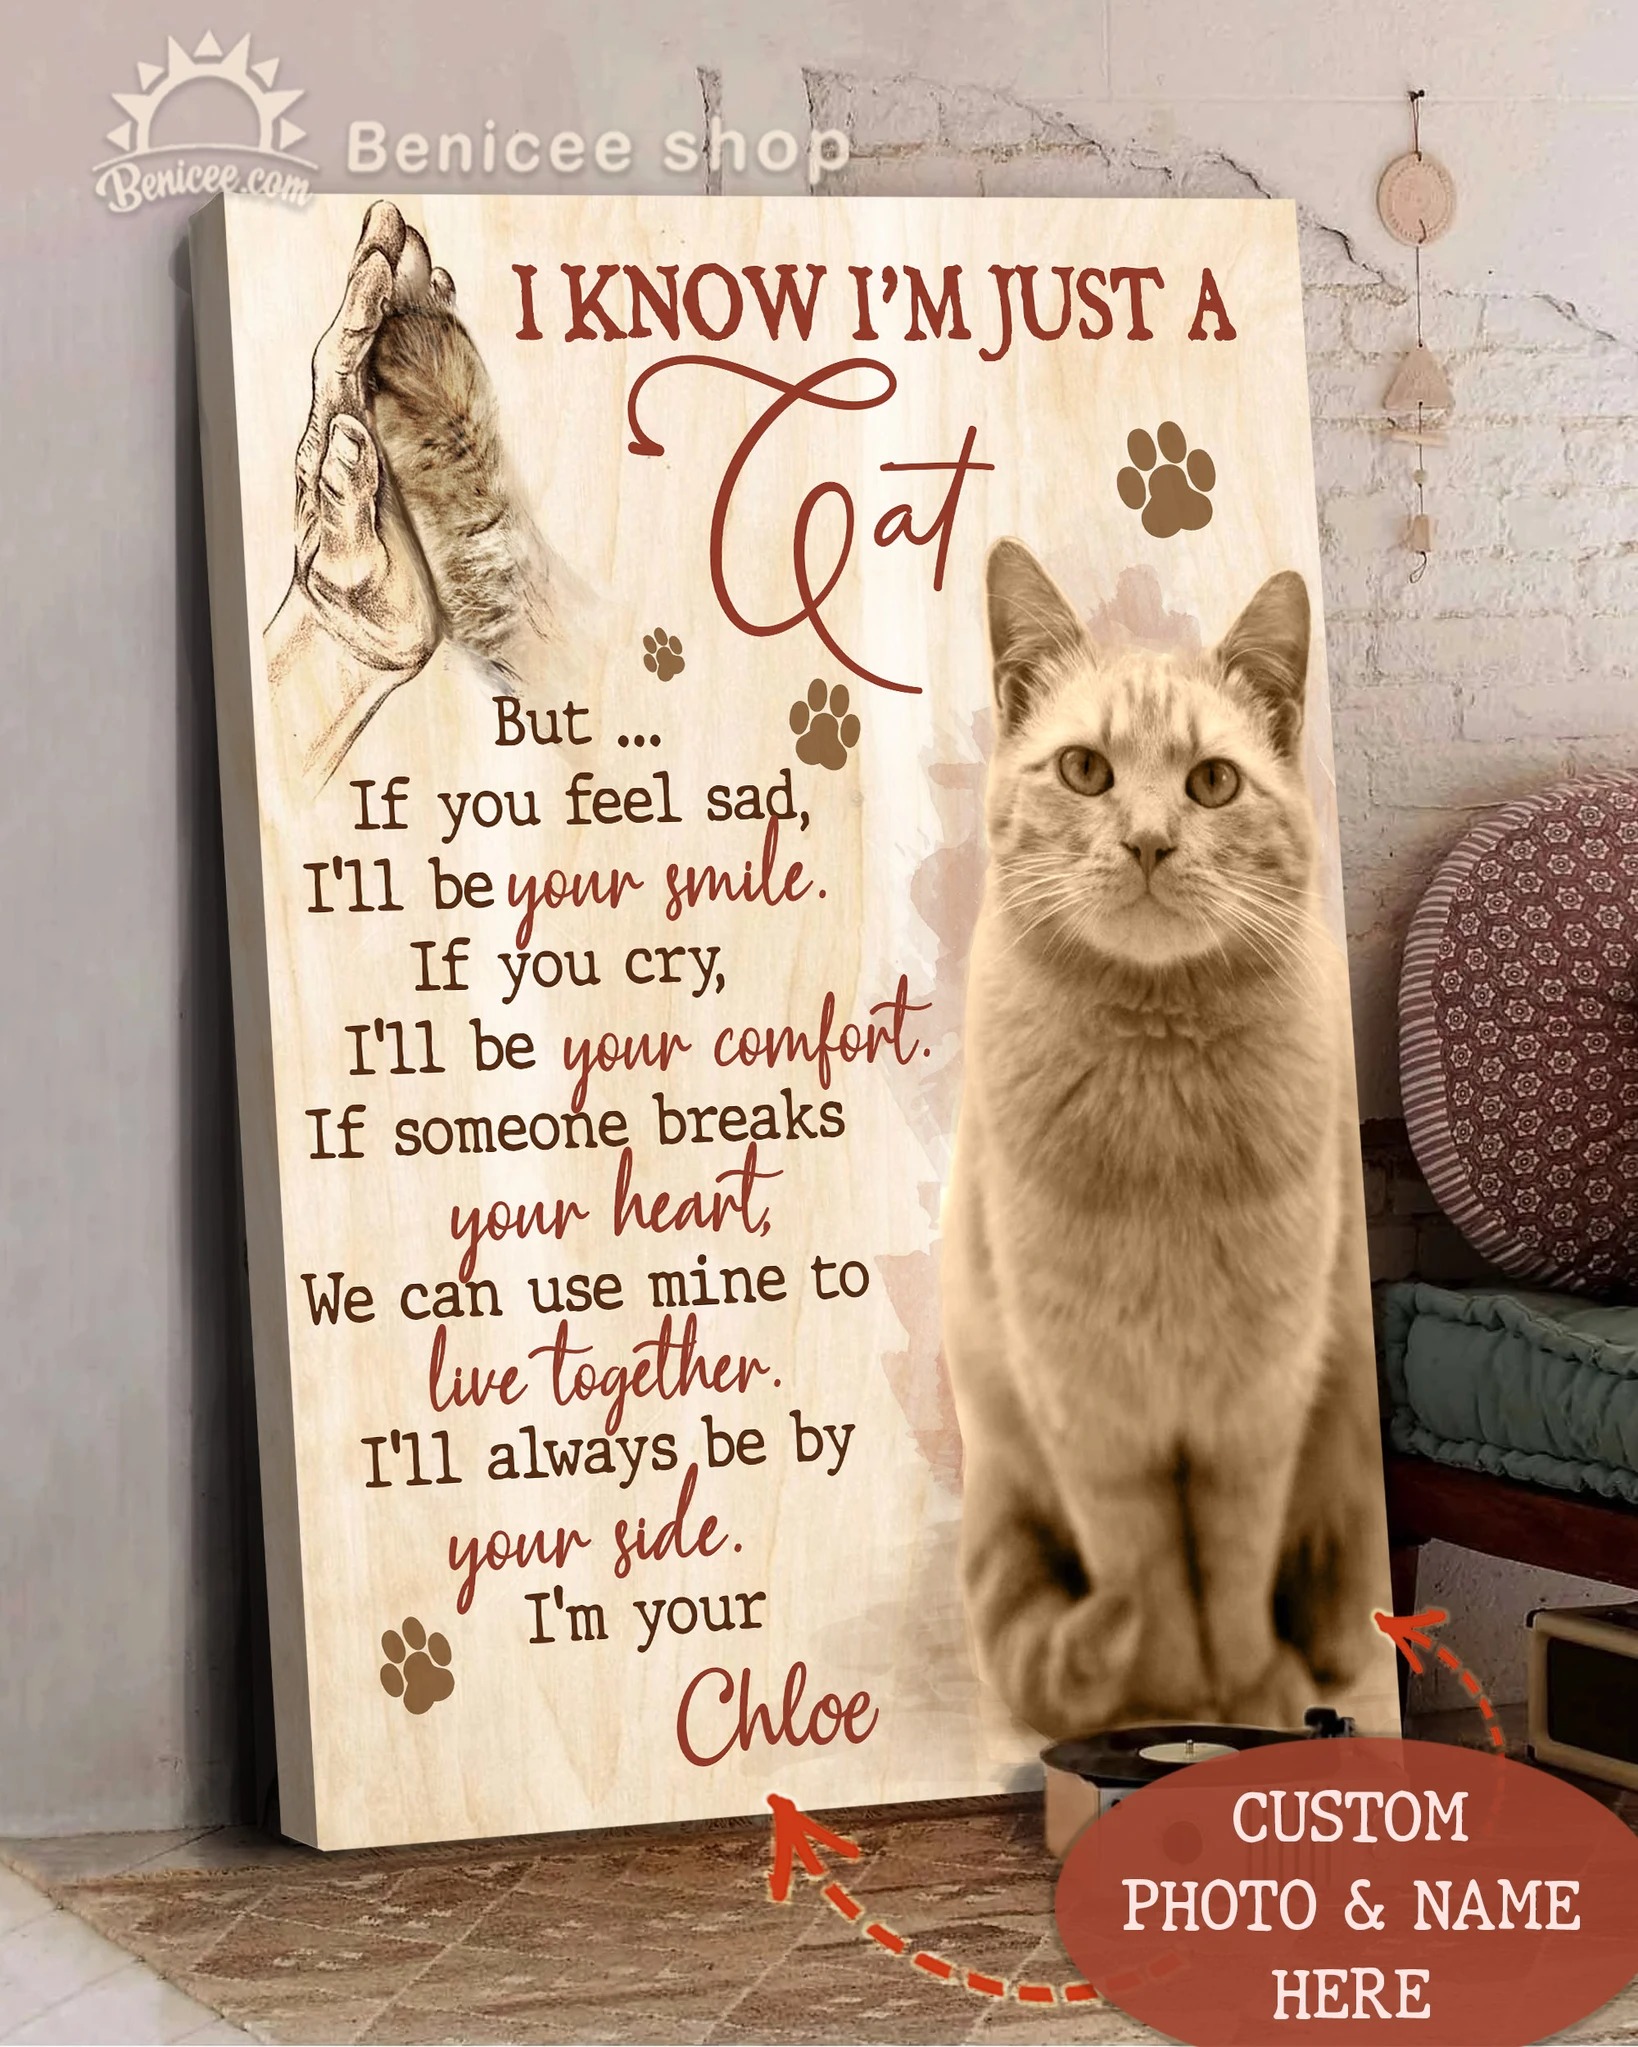 Custom photo and name i know i'm just a cat canvas prints 1